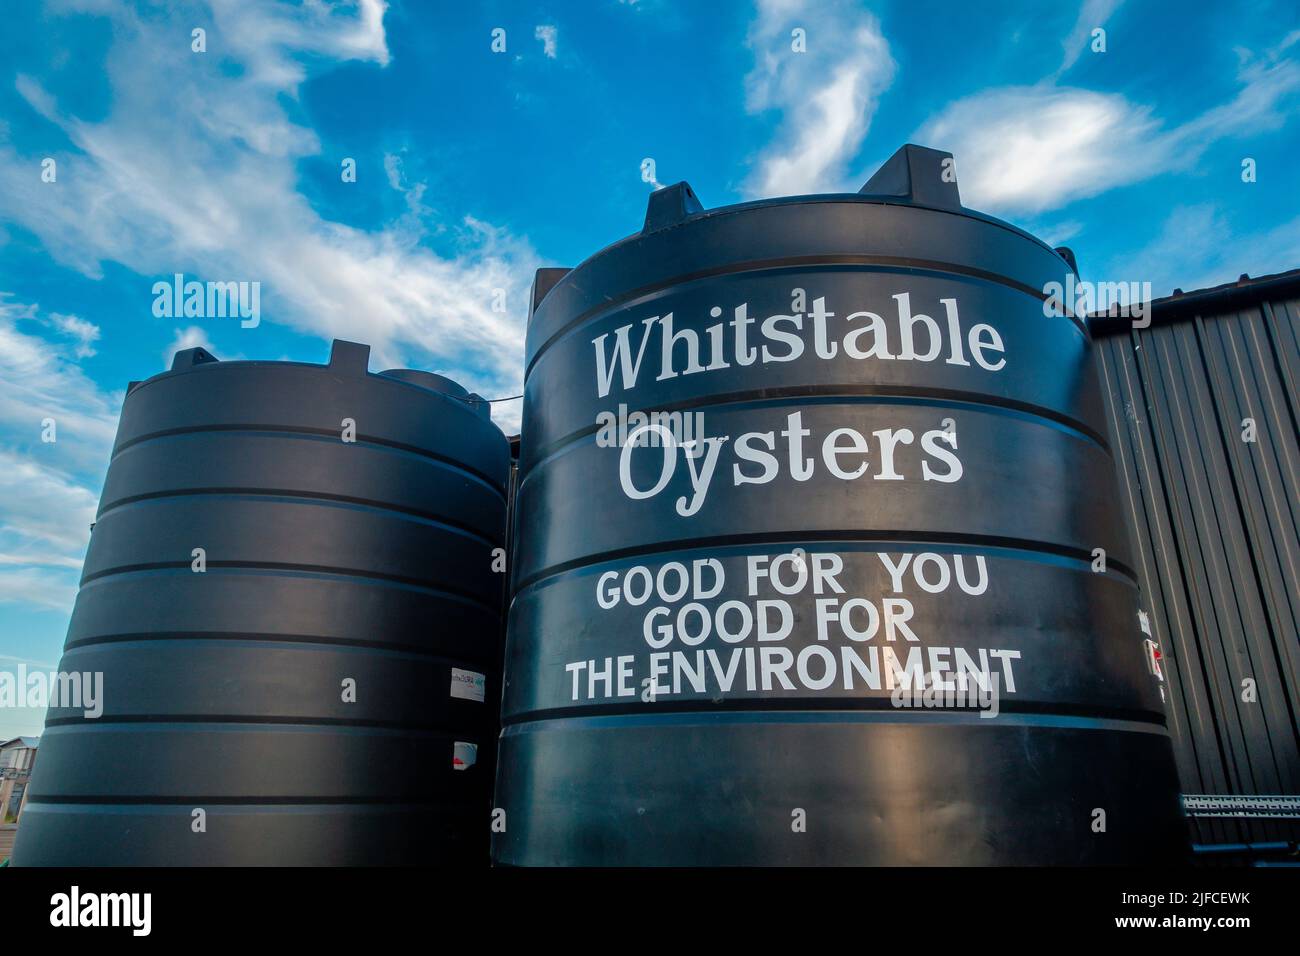 Whitstable Oysters,Water Tank,Whitstable Beach,Whitstable, Kent,Good you you. Good for the Environment Stock Photo